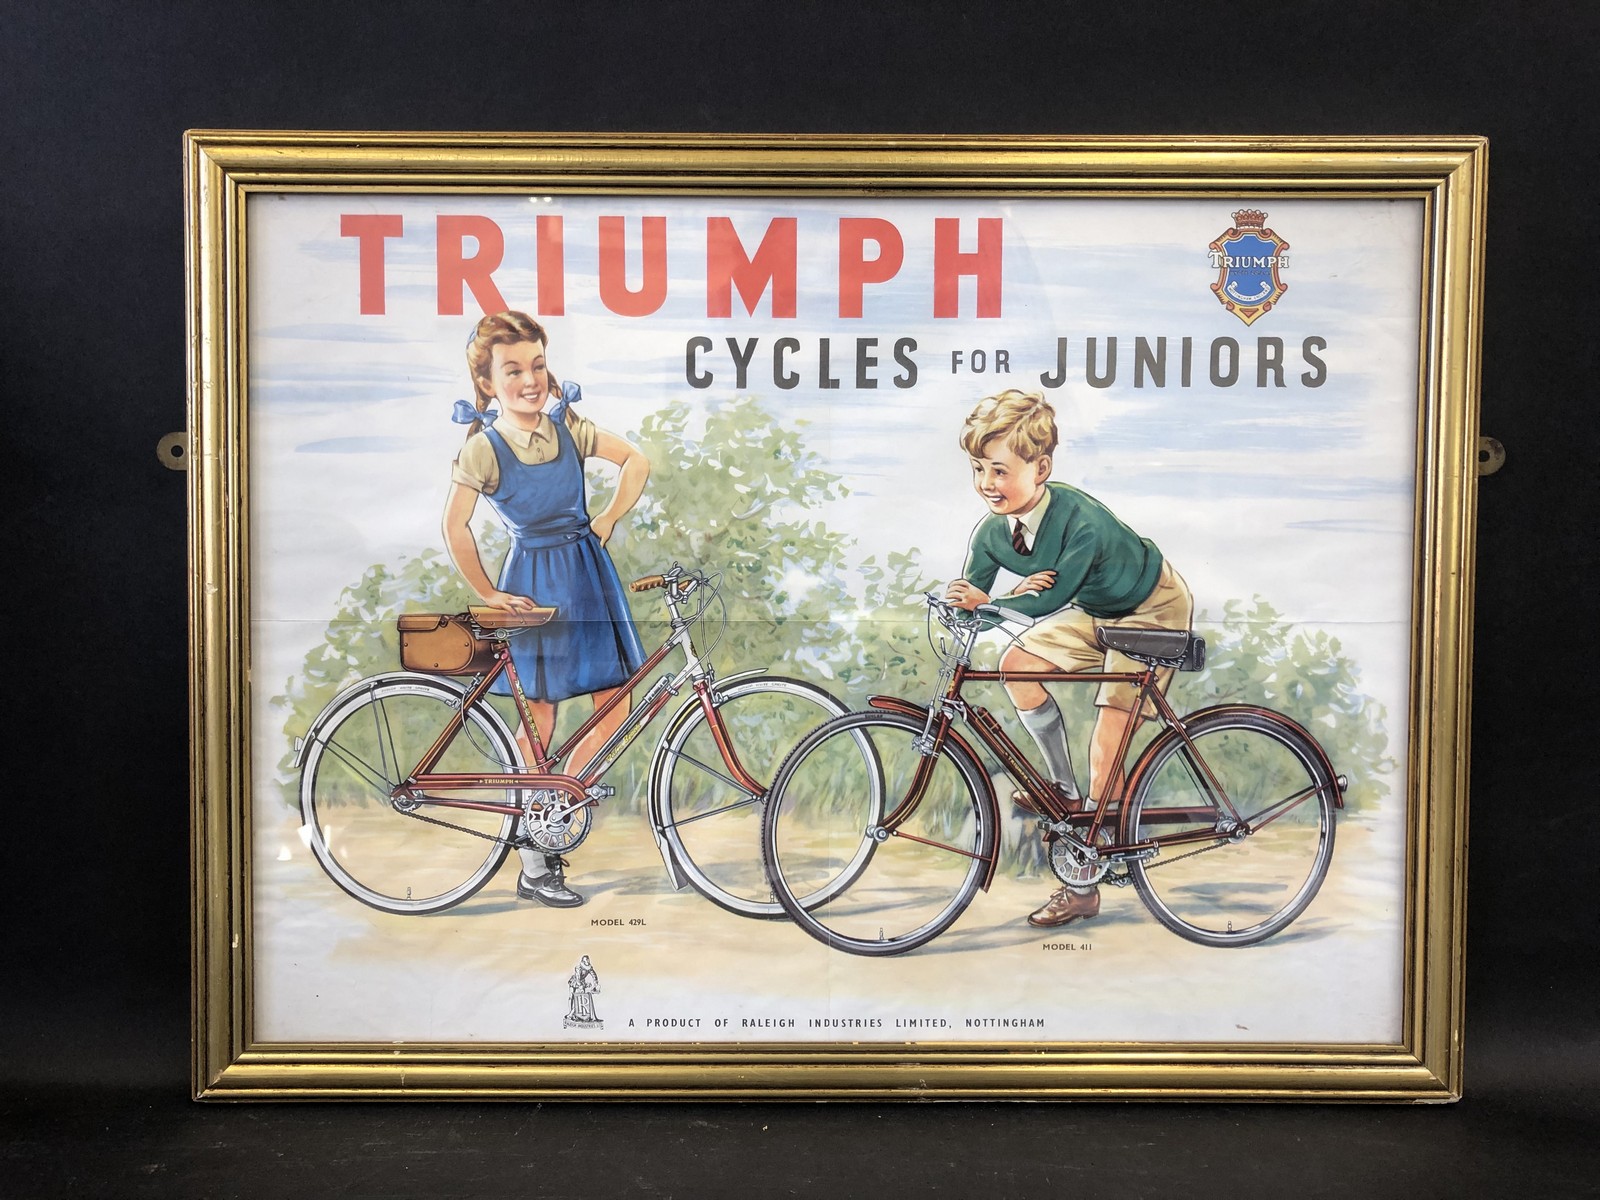 A 'Triumph Cycles for Juniors' pictorial framed poster, 20 1/2 x 15 3/4".